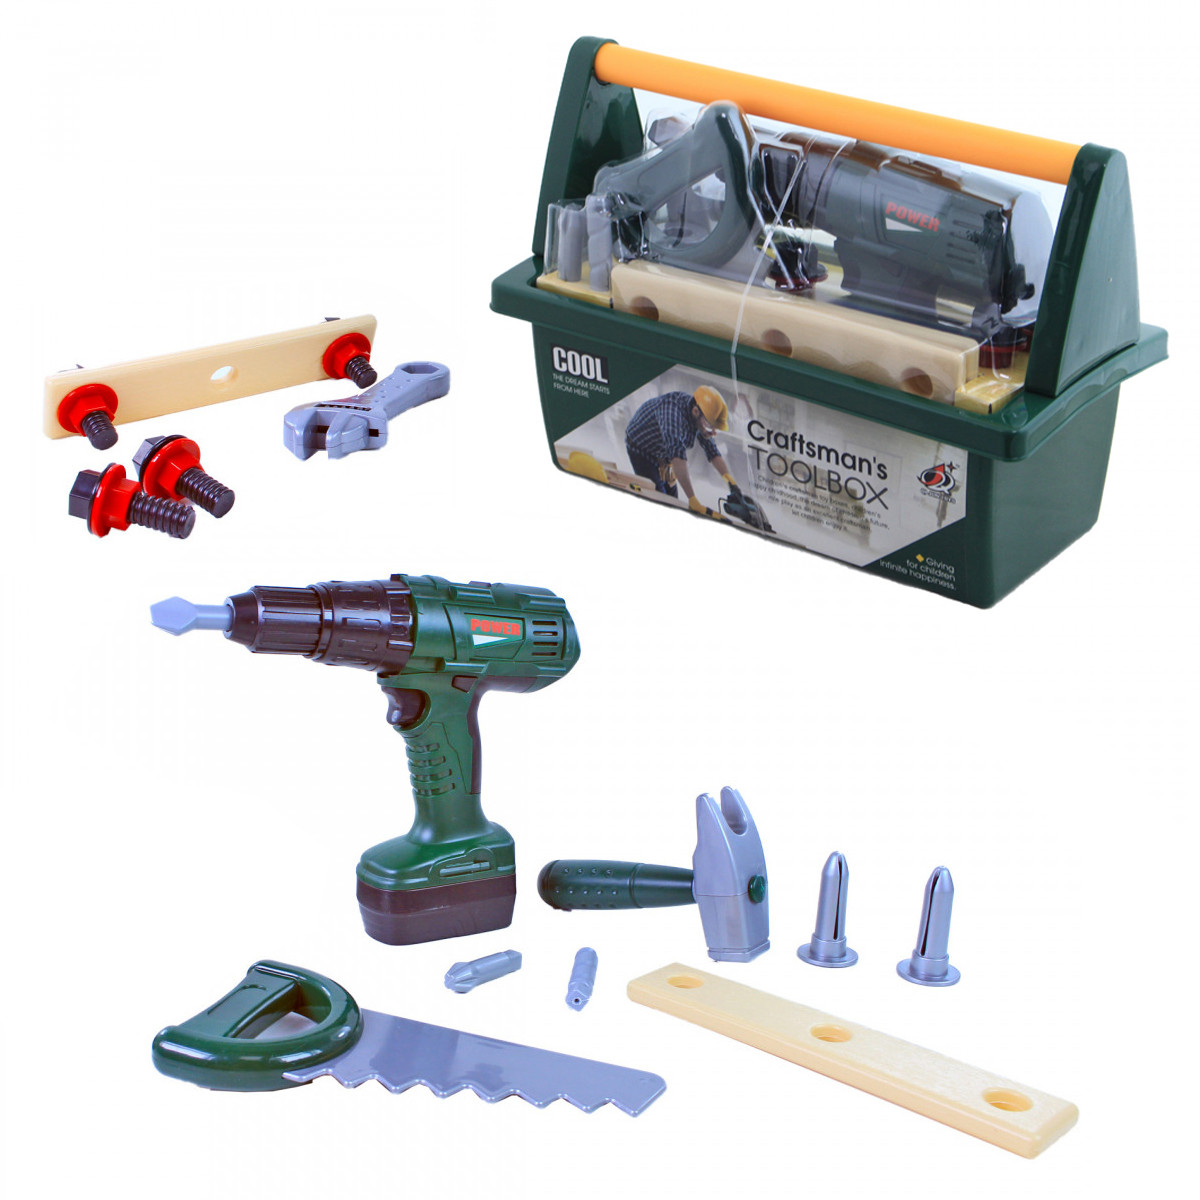 Tool case with cordless drill